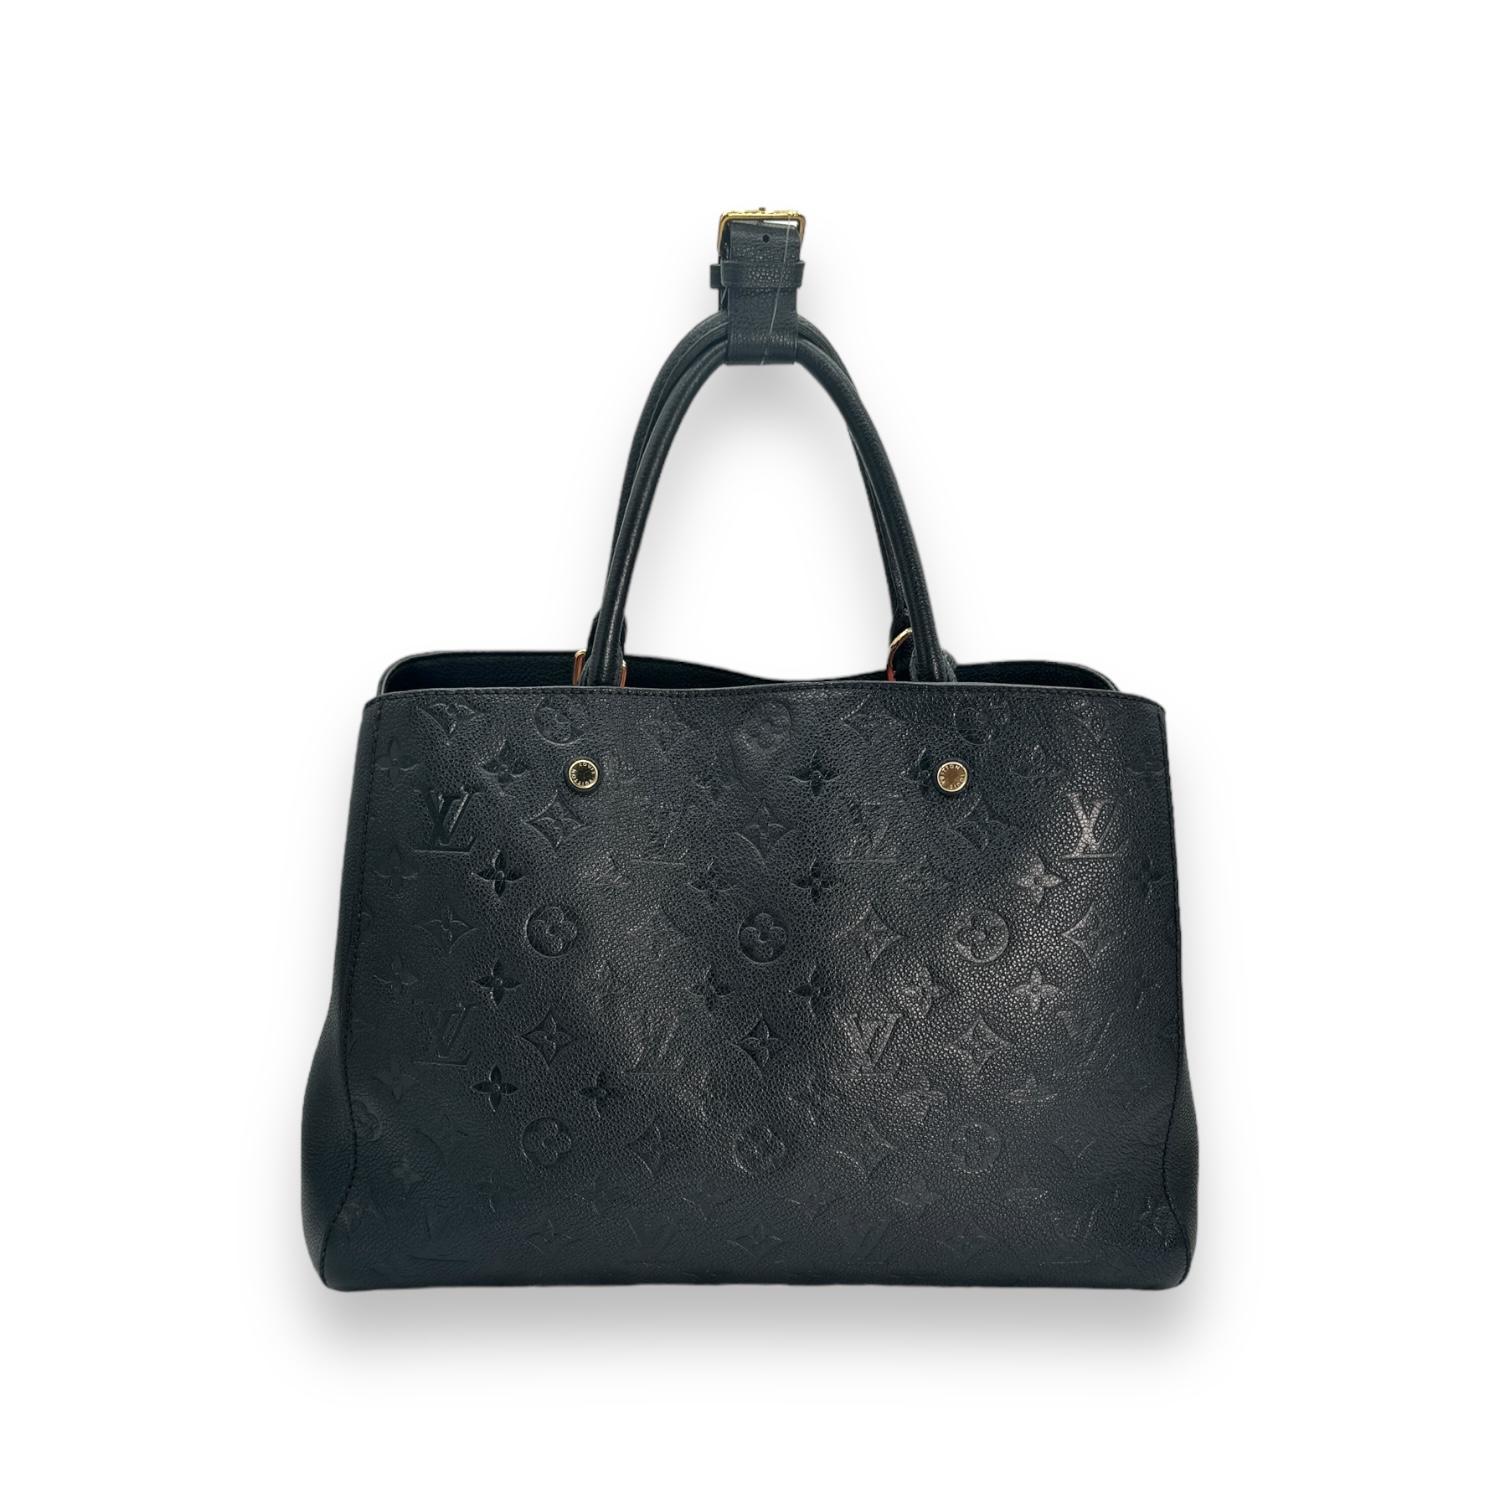 This chic handbag is crafted of Louis Vuitton monogram embossed leather in black. The handbag features rolled leather top handles with gold-tone brass links and a broad open-top, revealing a striped fabric interior with zipper and patch pockets.